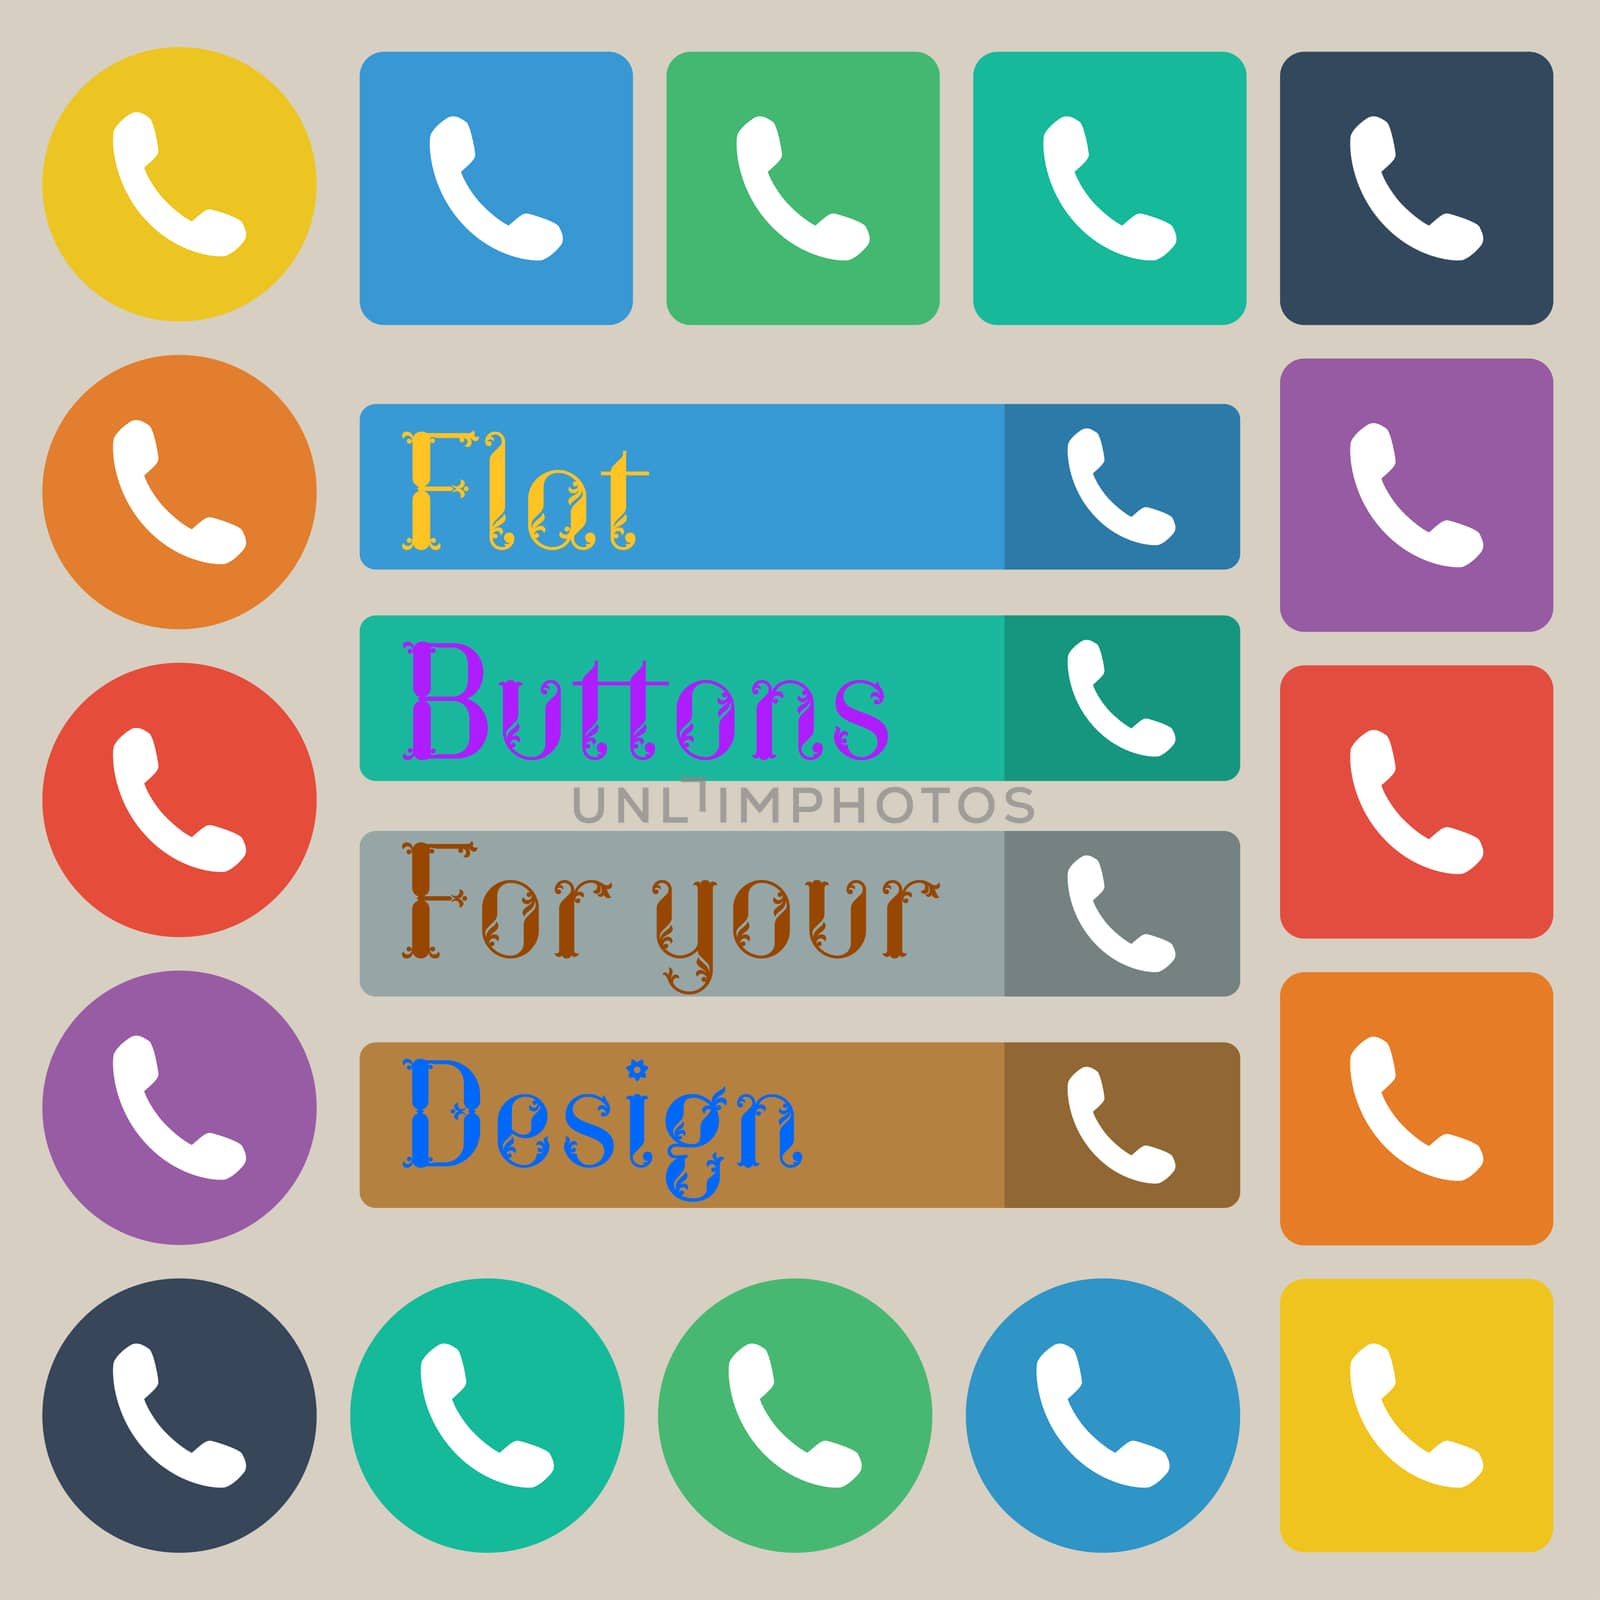 Phone, Support, Call center icon sign. Set of twenty colored flat, round, square and rectangular buttons. illustration